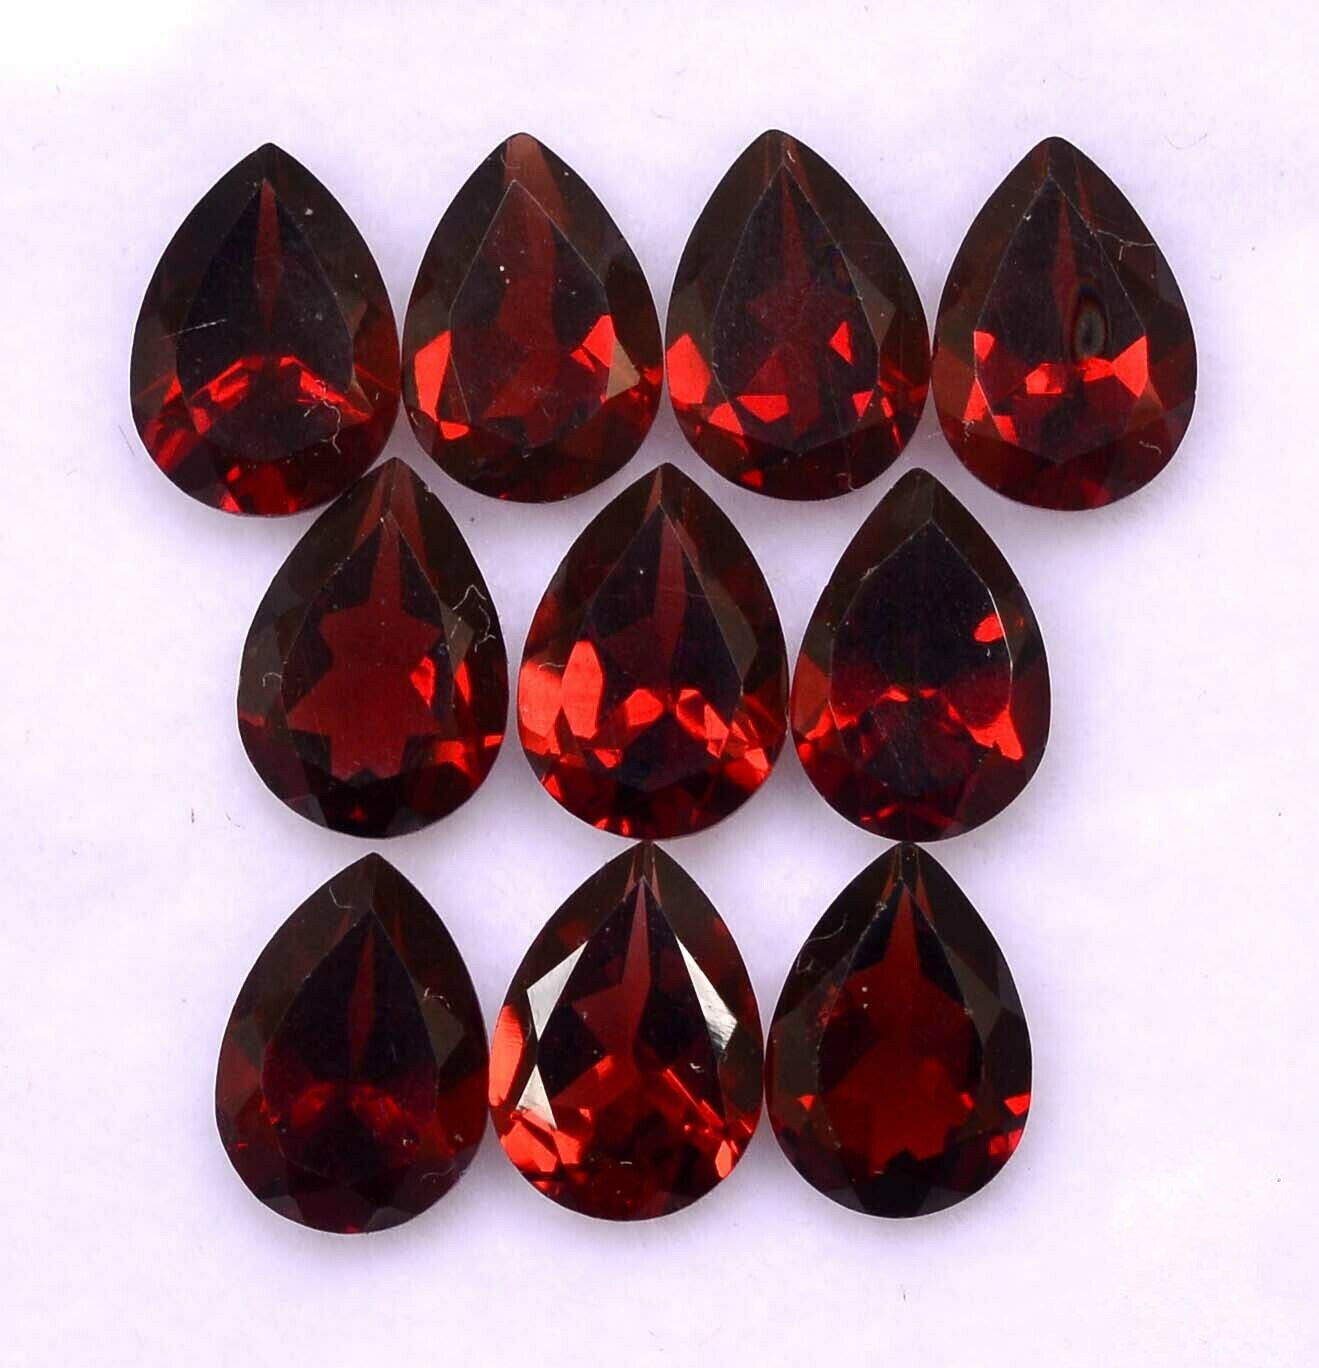 Details about   Lovely Lot Natural Garnet Mozambique 4X6 mm Pear Faceted Cut Loose Gemstone 